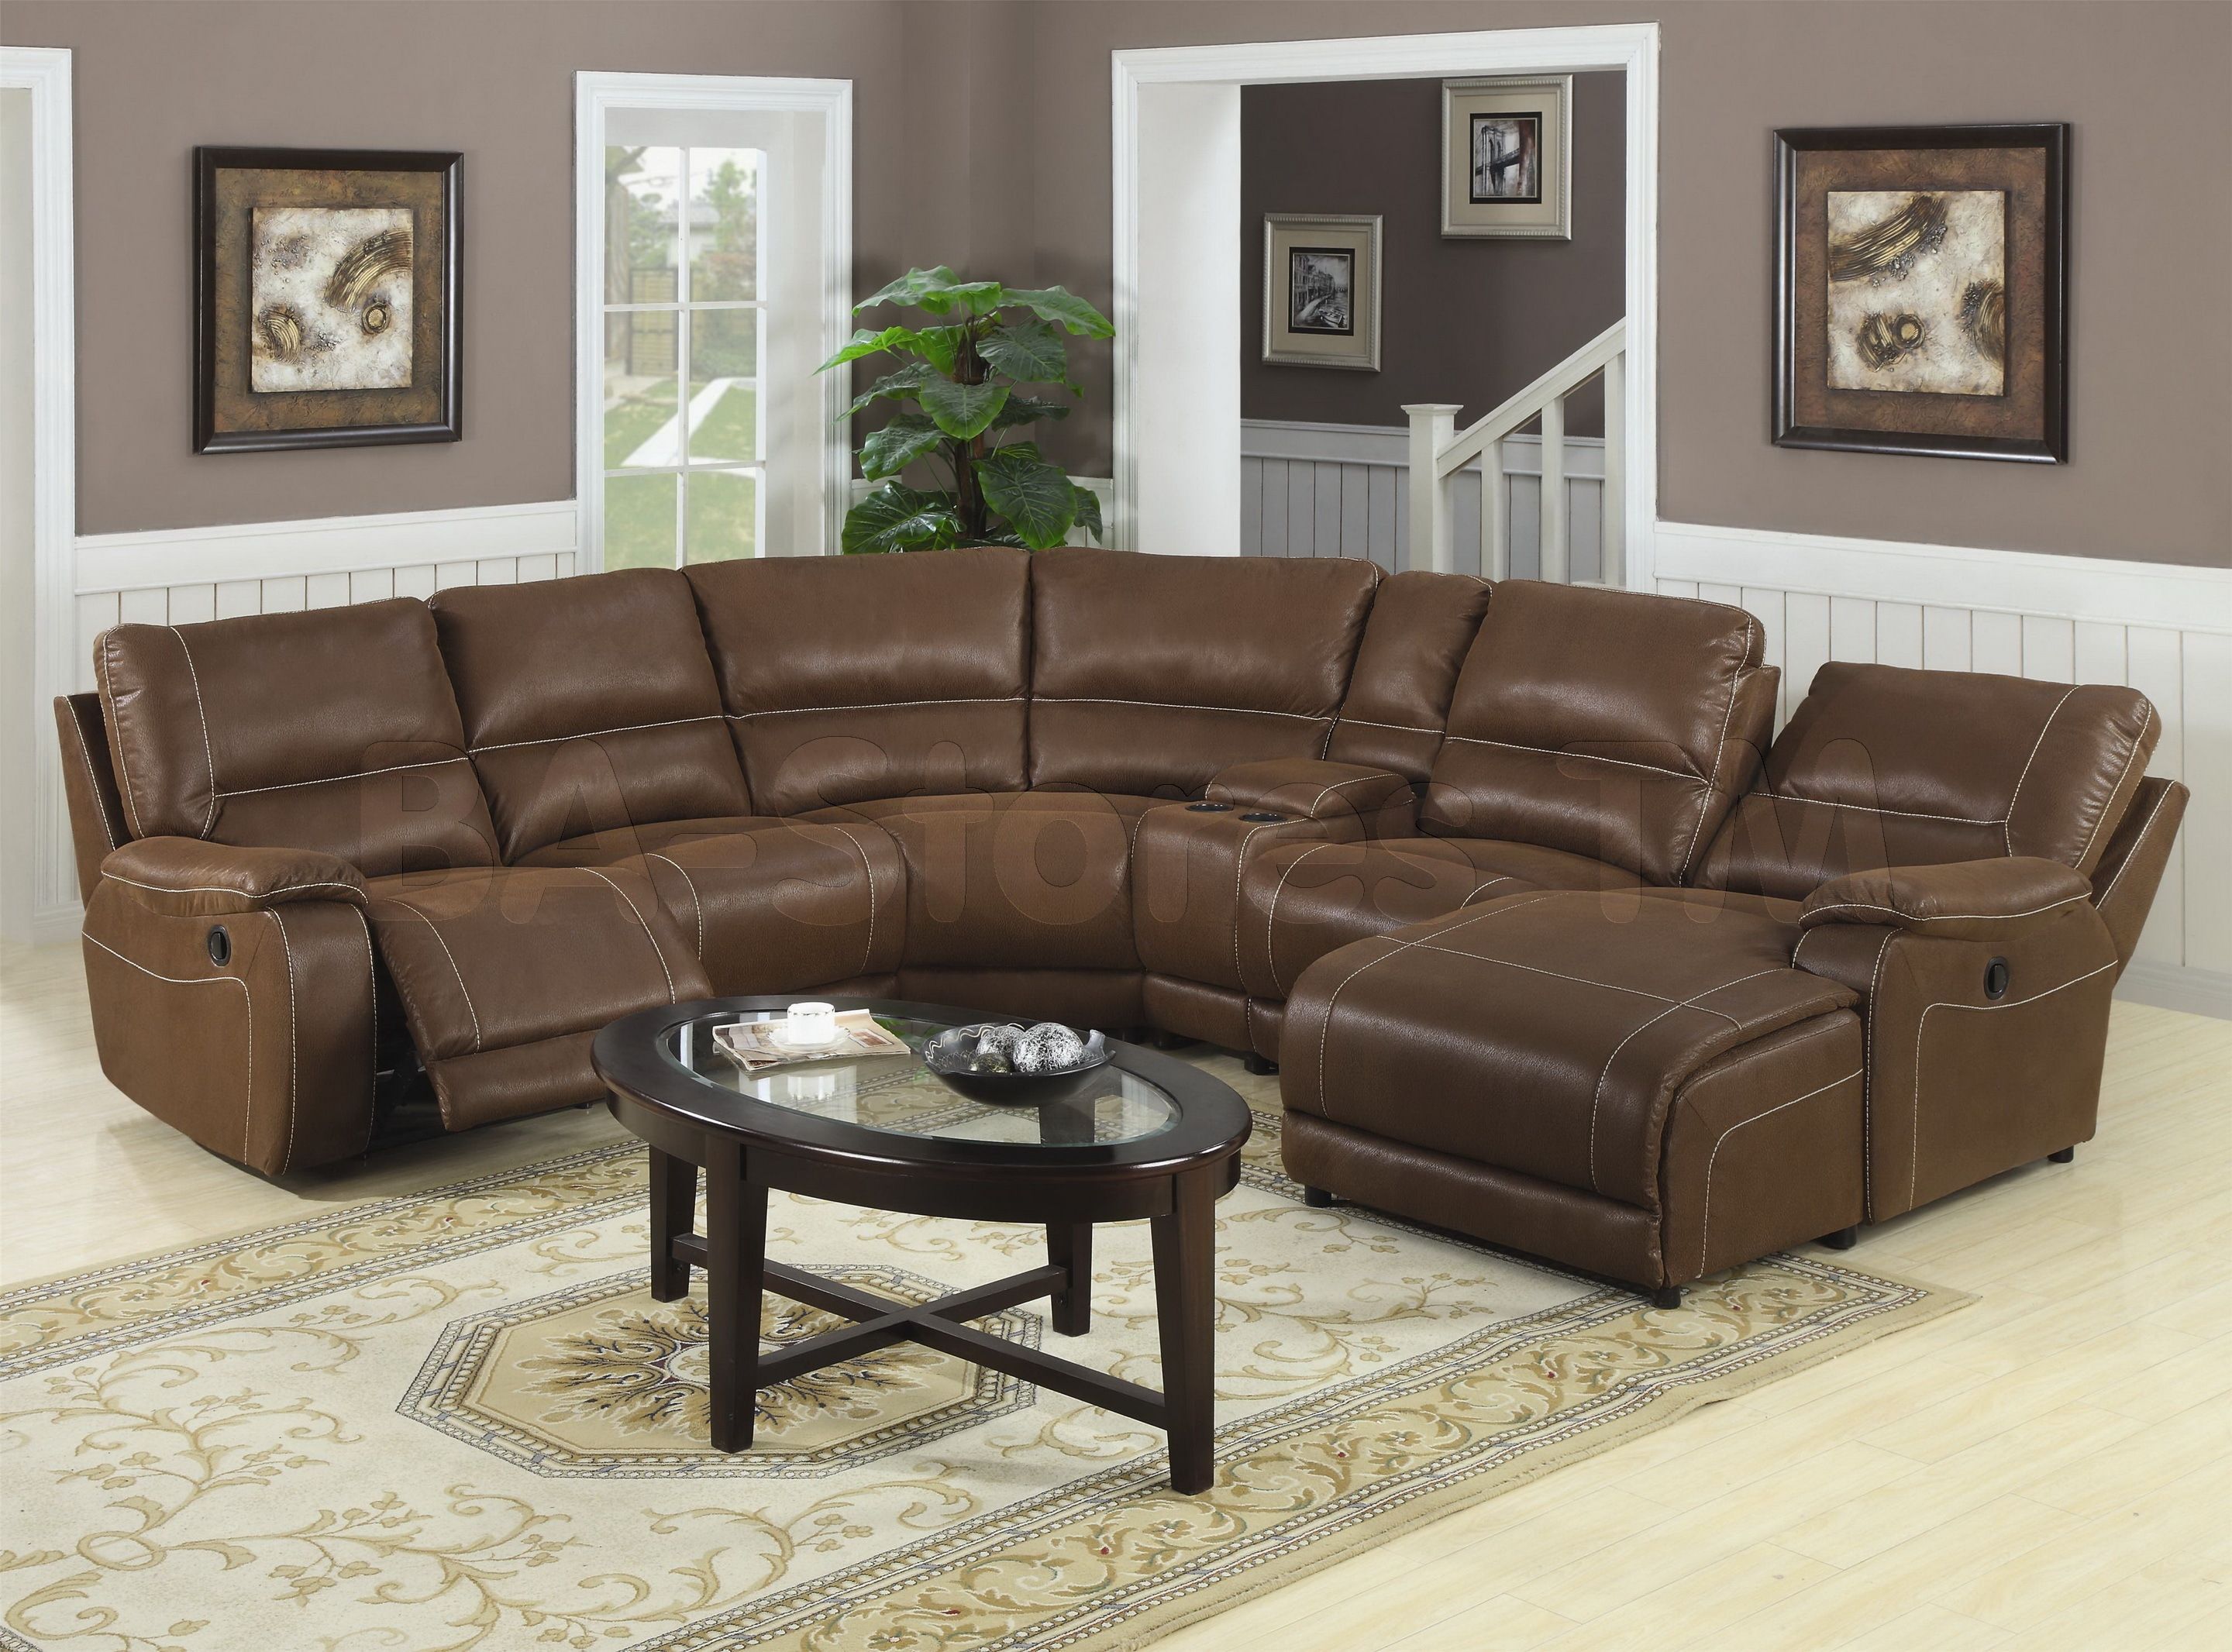 Curved Sectional Sofa With Recliner Cleanupflorida Regarding Curved Sectional Sofa With Recliner (Photo 4 of 12)